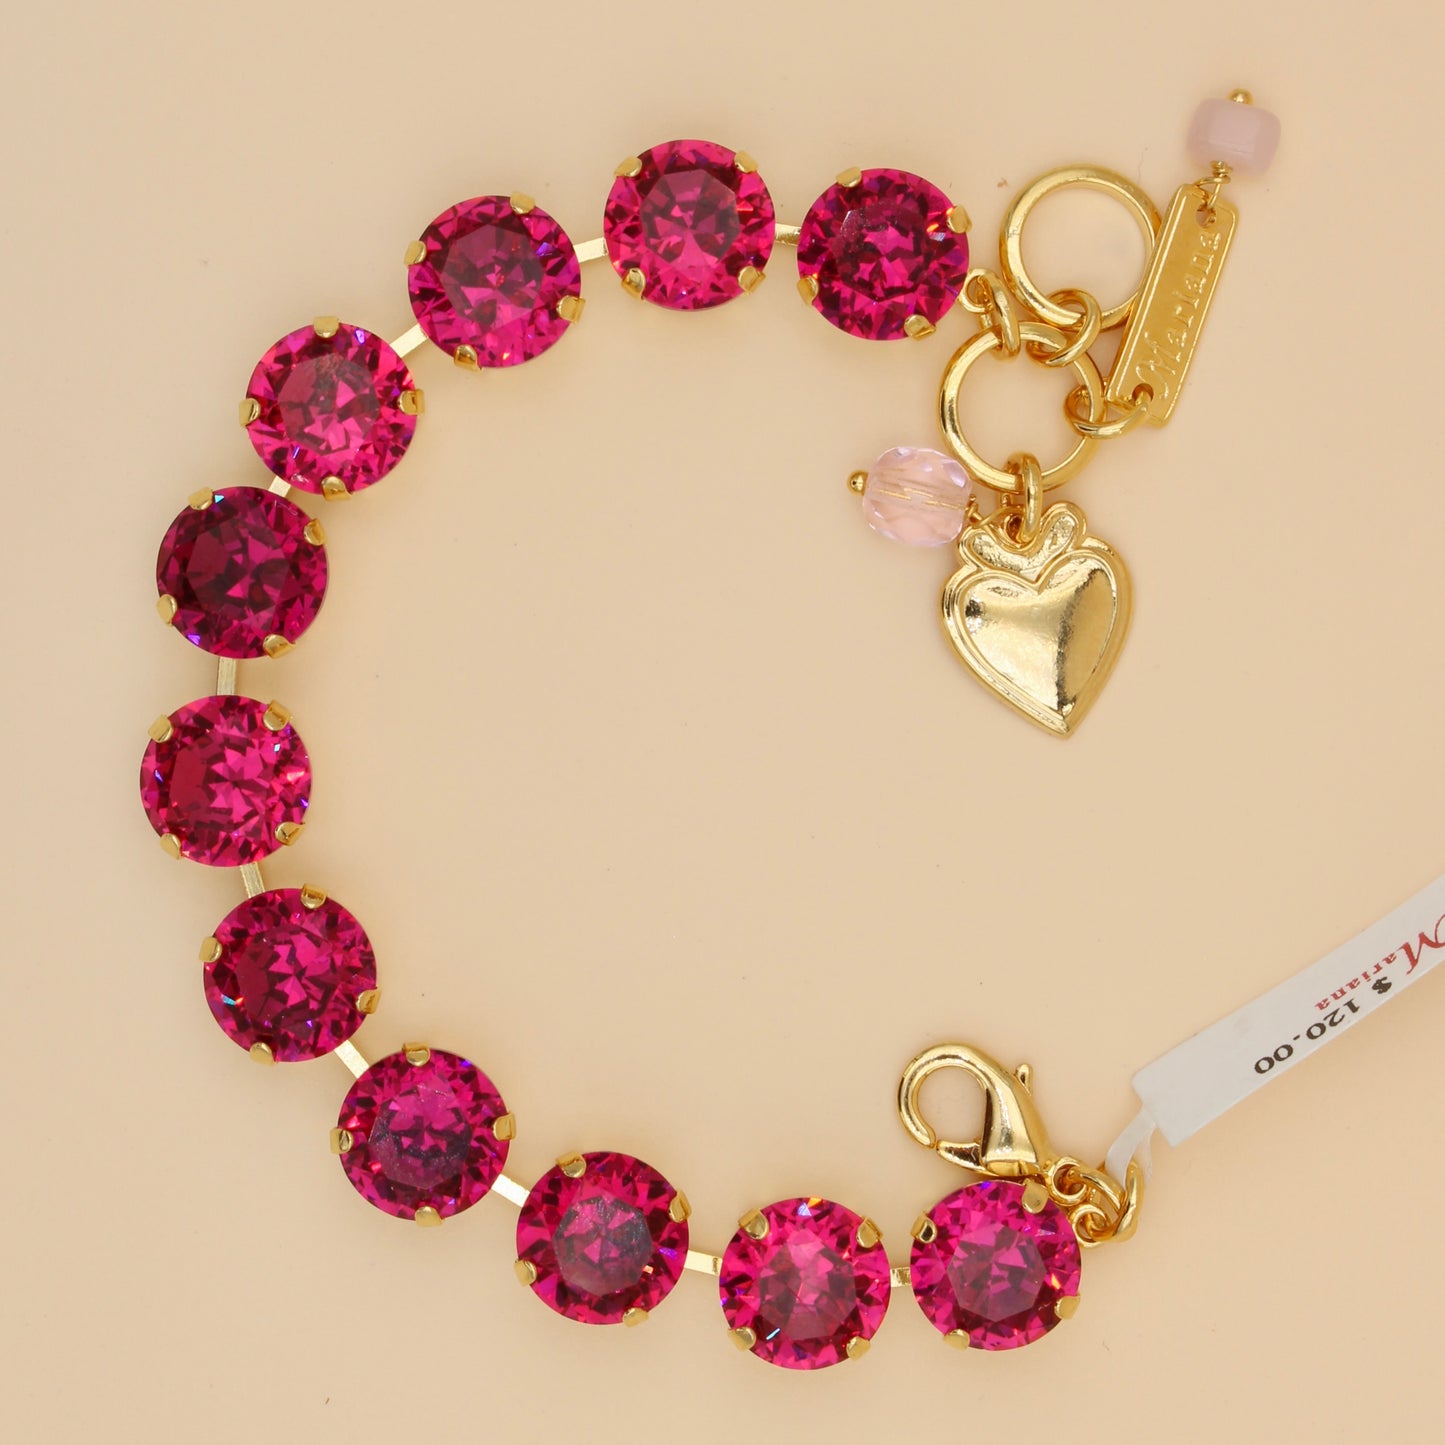 Fuchsia Lovable Everyday Bracelet in Yellow Gold